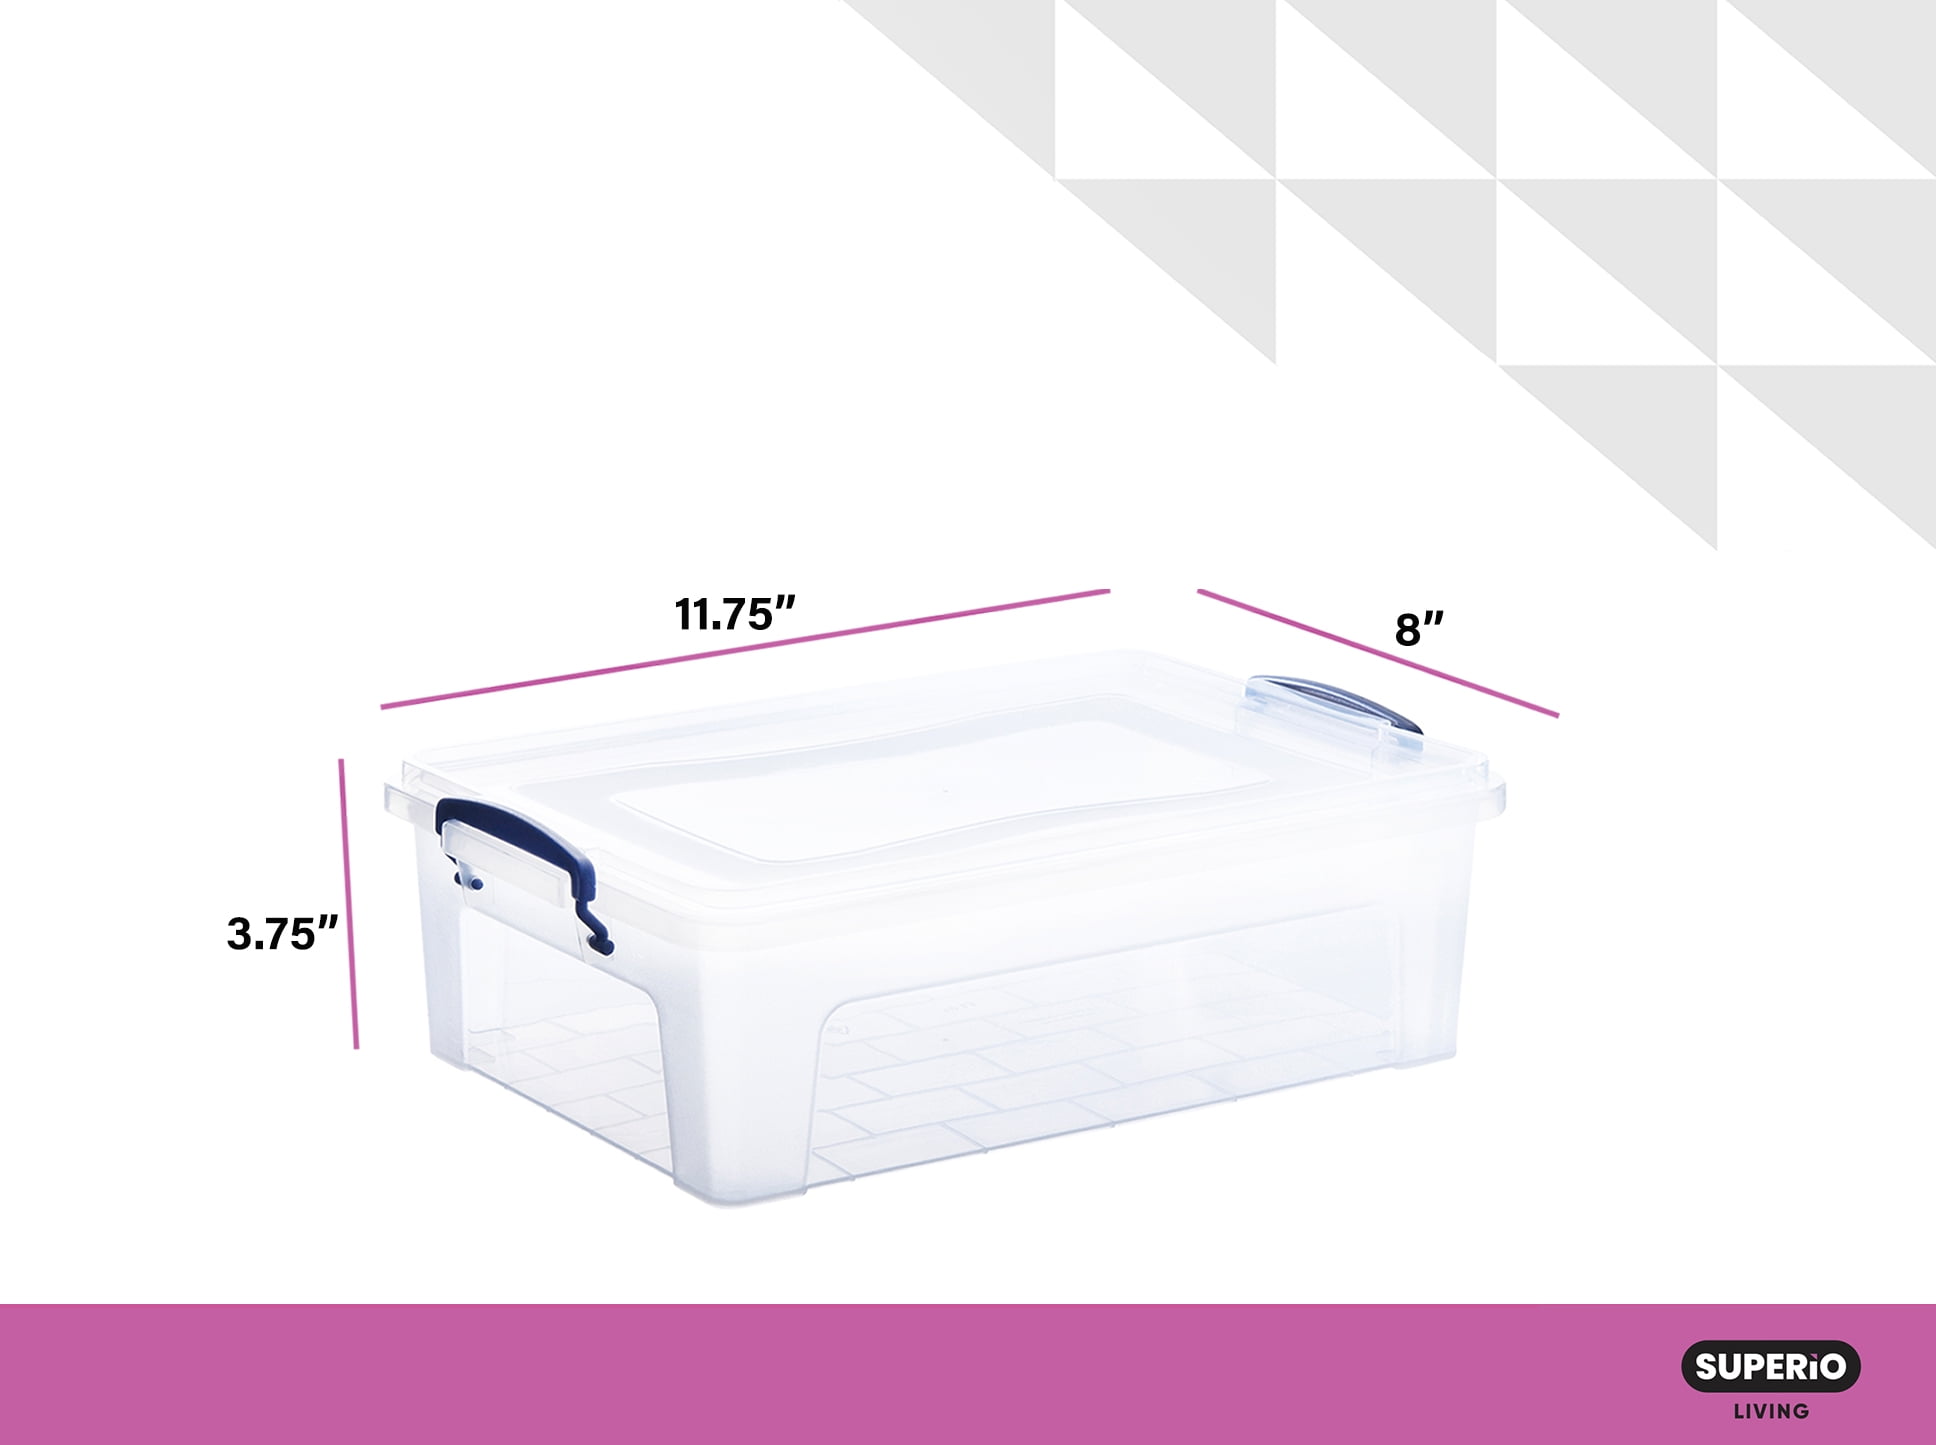 Clear Plastic Bright Small Storage Boxes Size 6.5x3.25x1.3 Inches